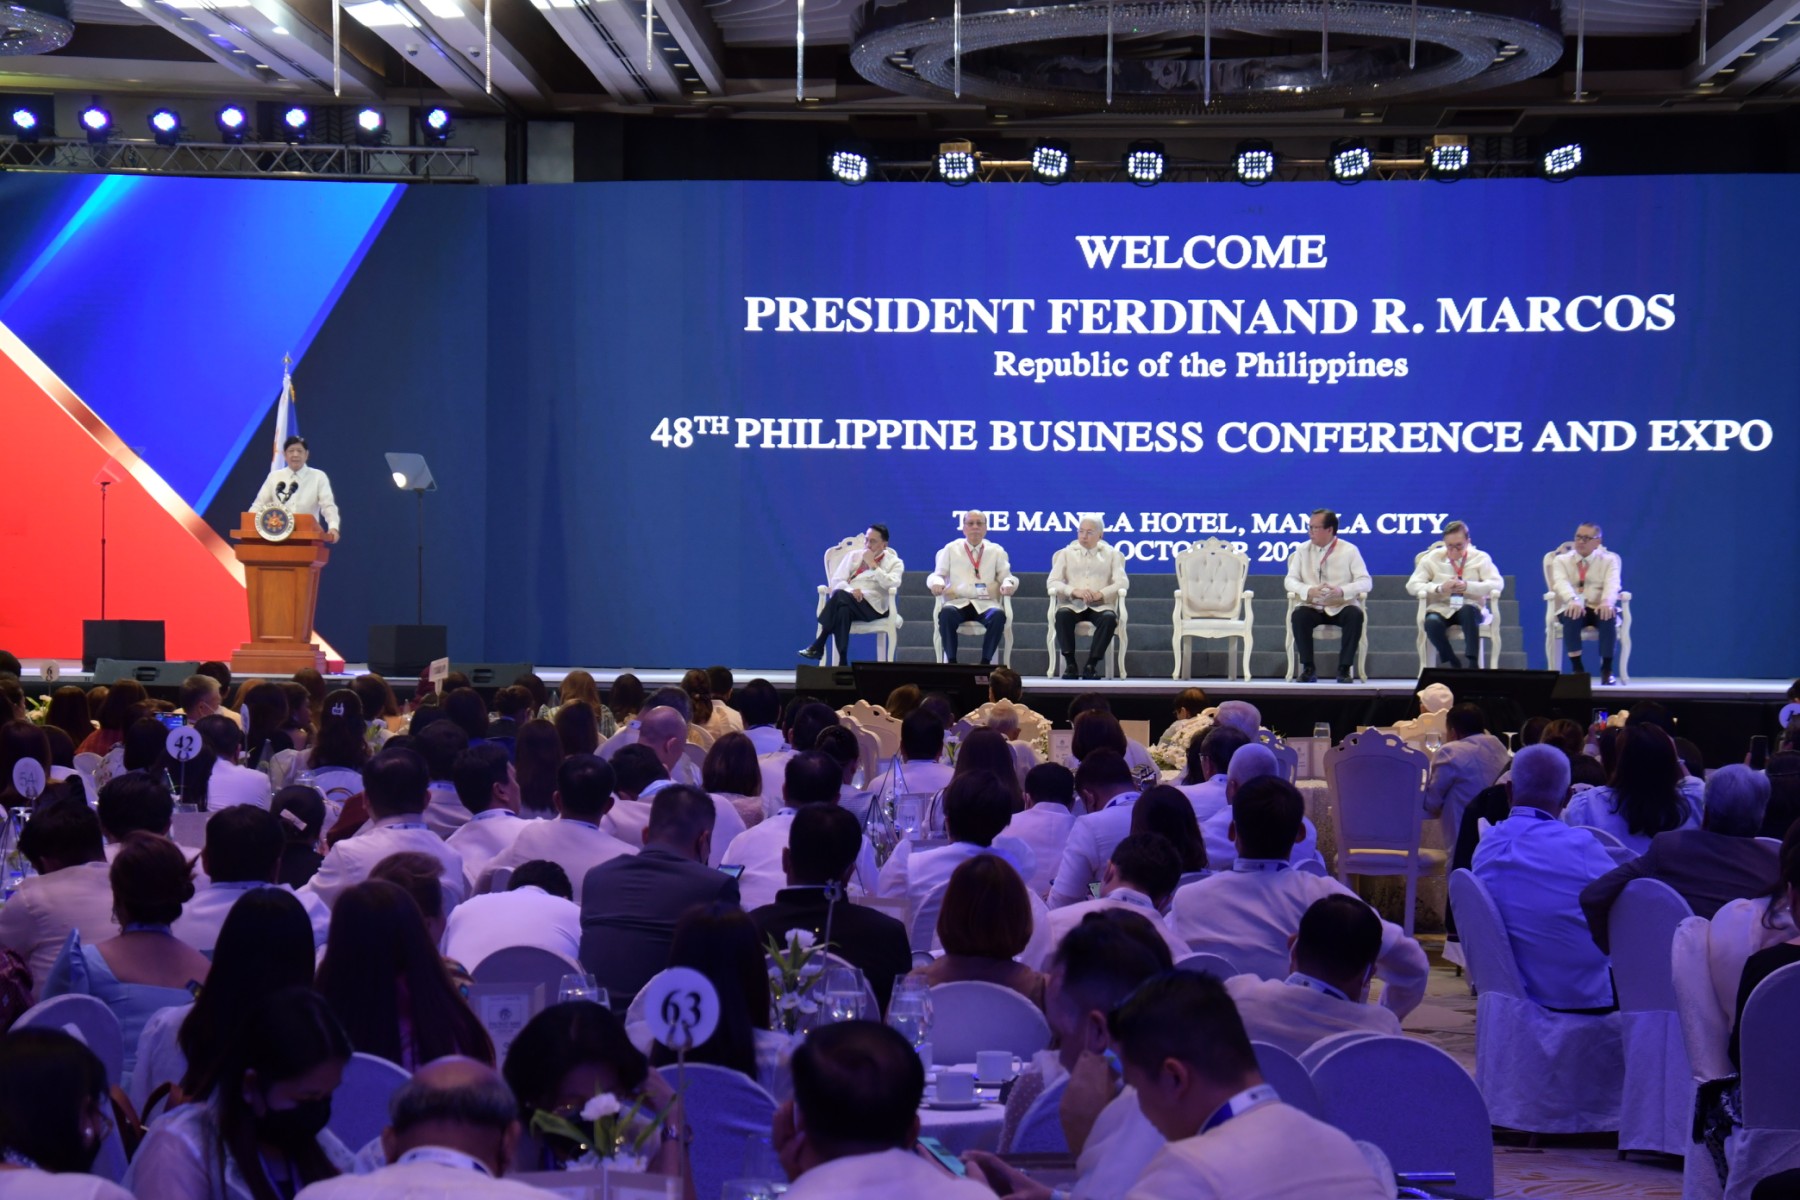 President Ferdinand R. Marcos graces the 48th Philippine Business Conference and Expo